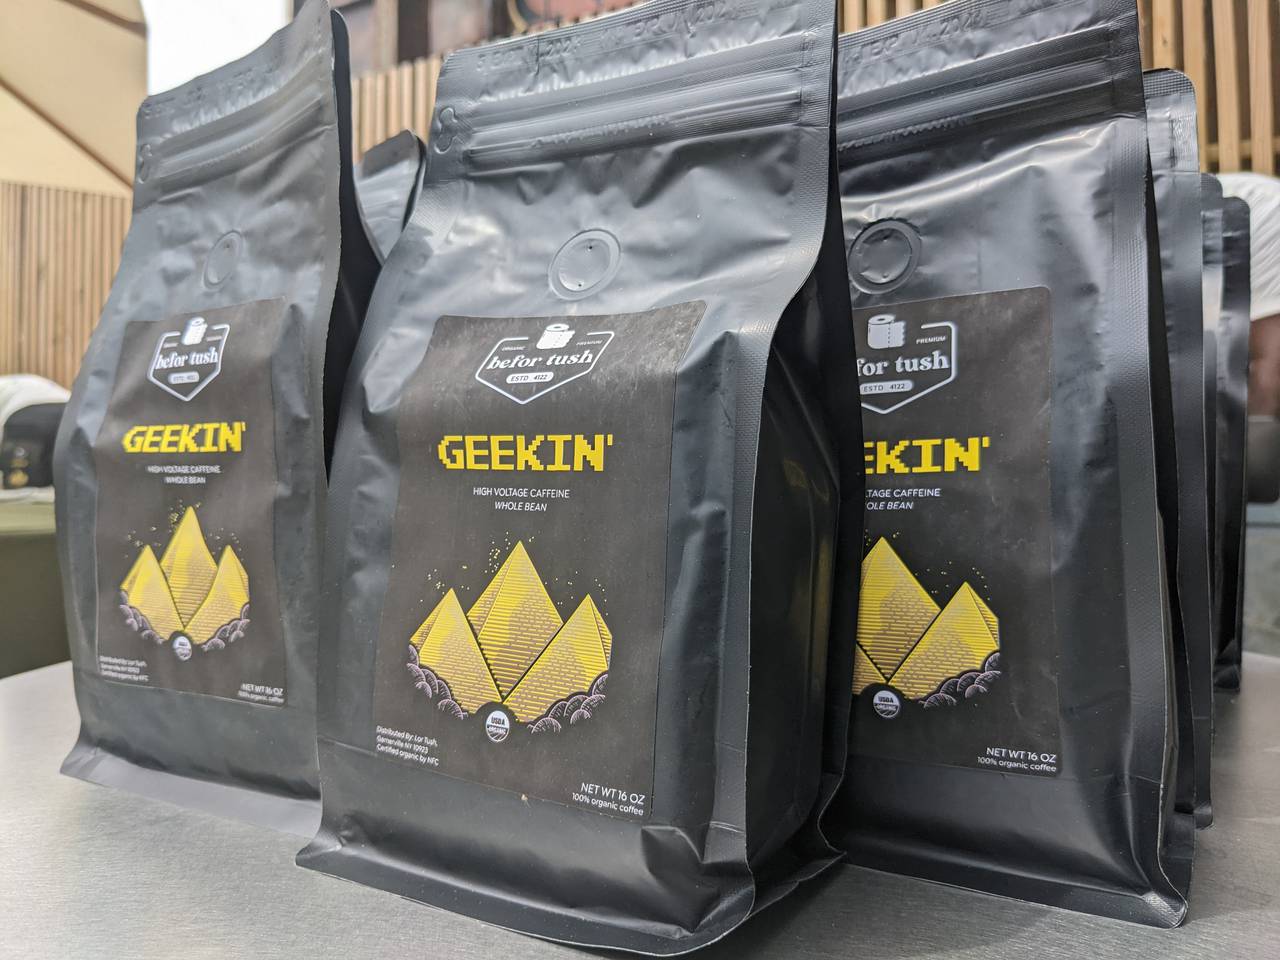 This is a close up picture of Geekin': Befor Tush's first coffee flavor. The packaging is black and gold, with the picture of three pyramids on the front.